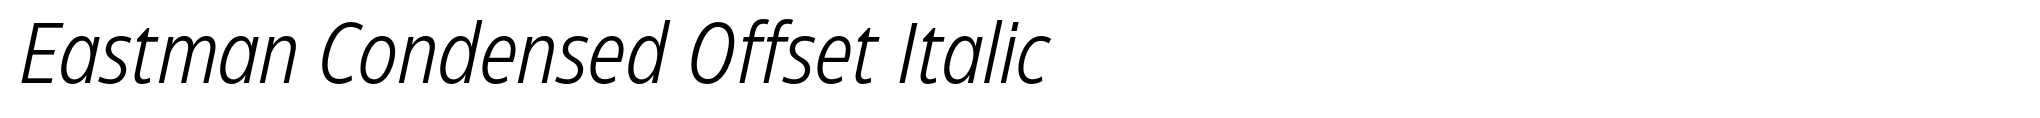 Eastman Condensed Offset Italic image